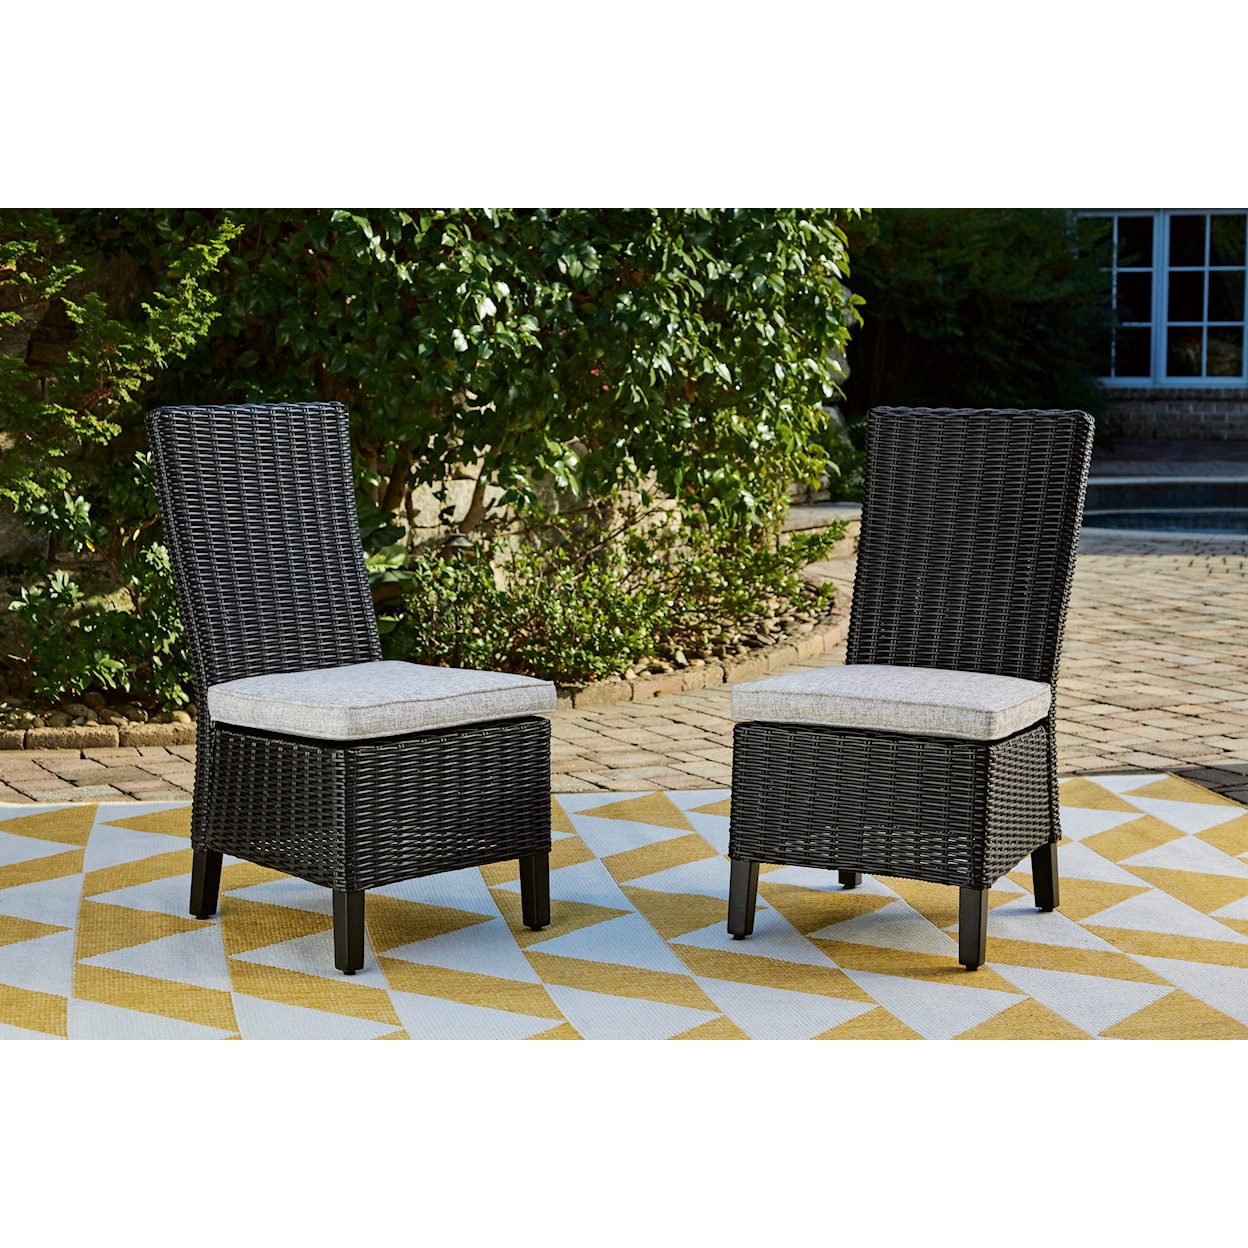 Michael Alan Select Beachcroft Set of 2 Side Chairs with Cushion